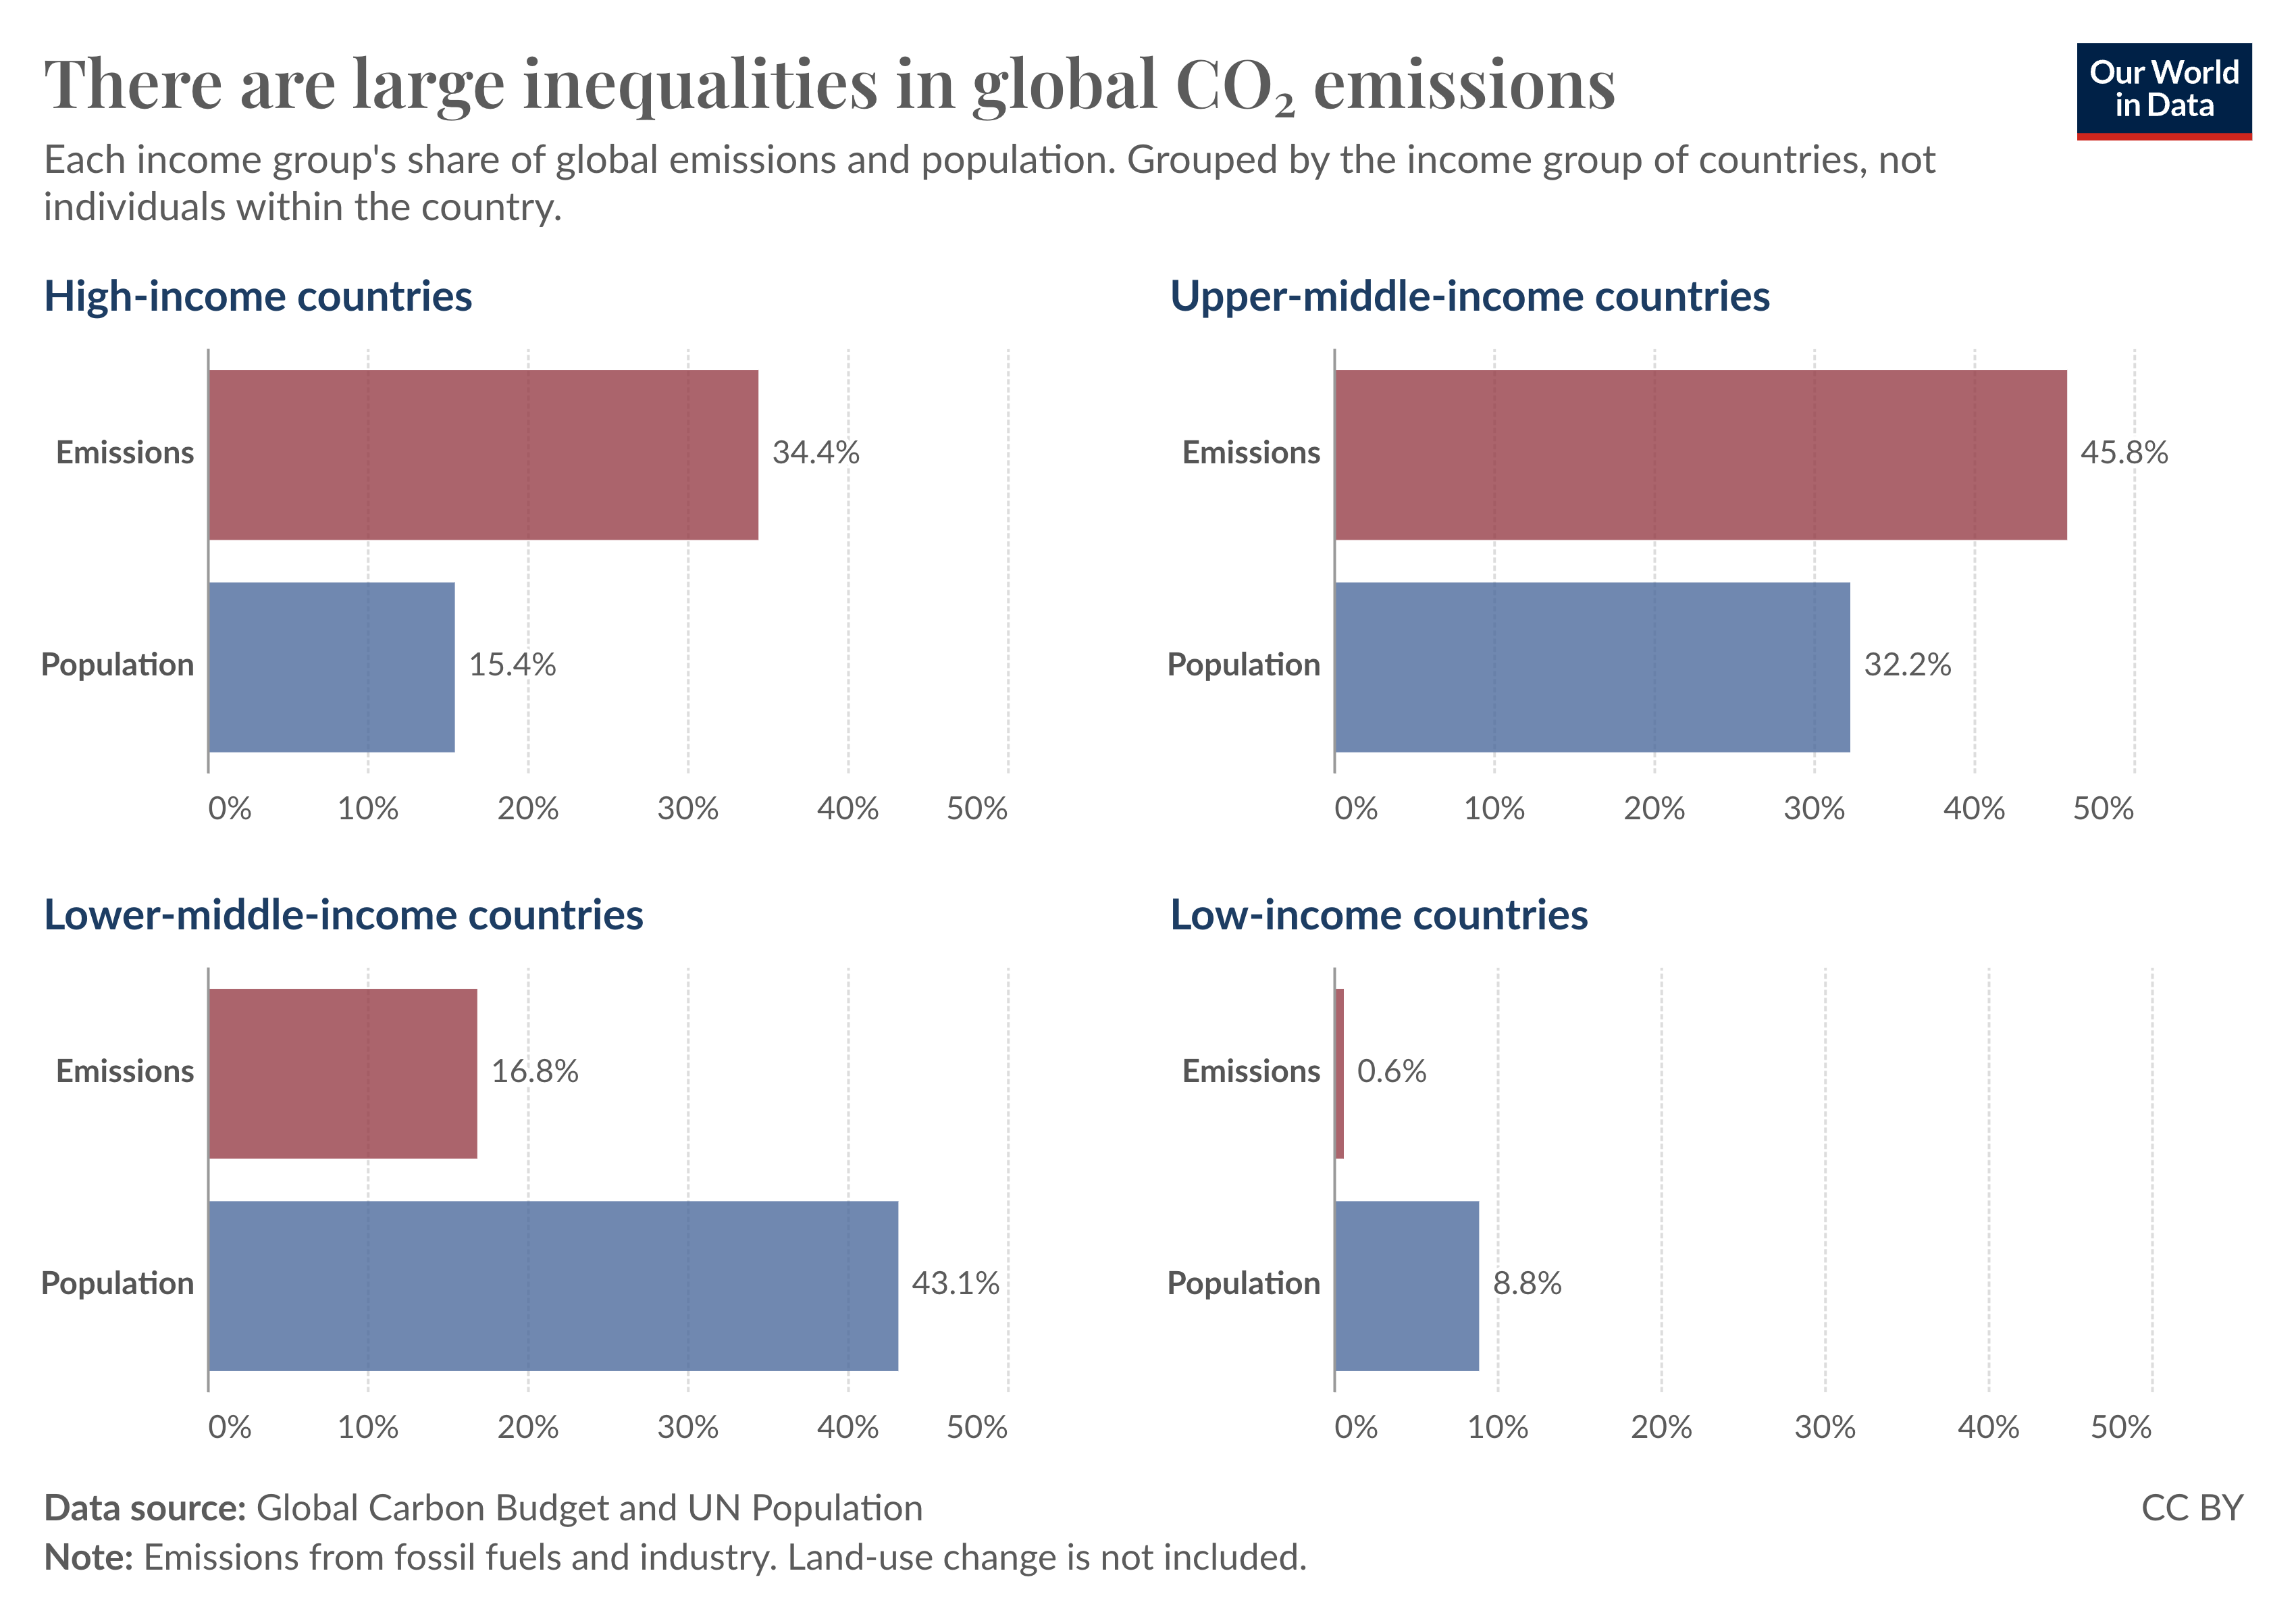 Grouped bar chart showing each income group's share of global co2 emissions and population.